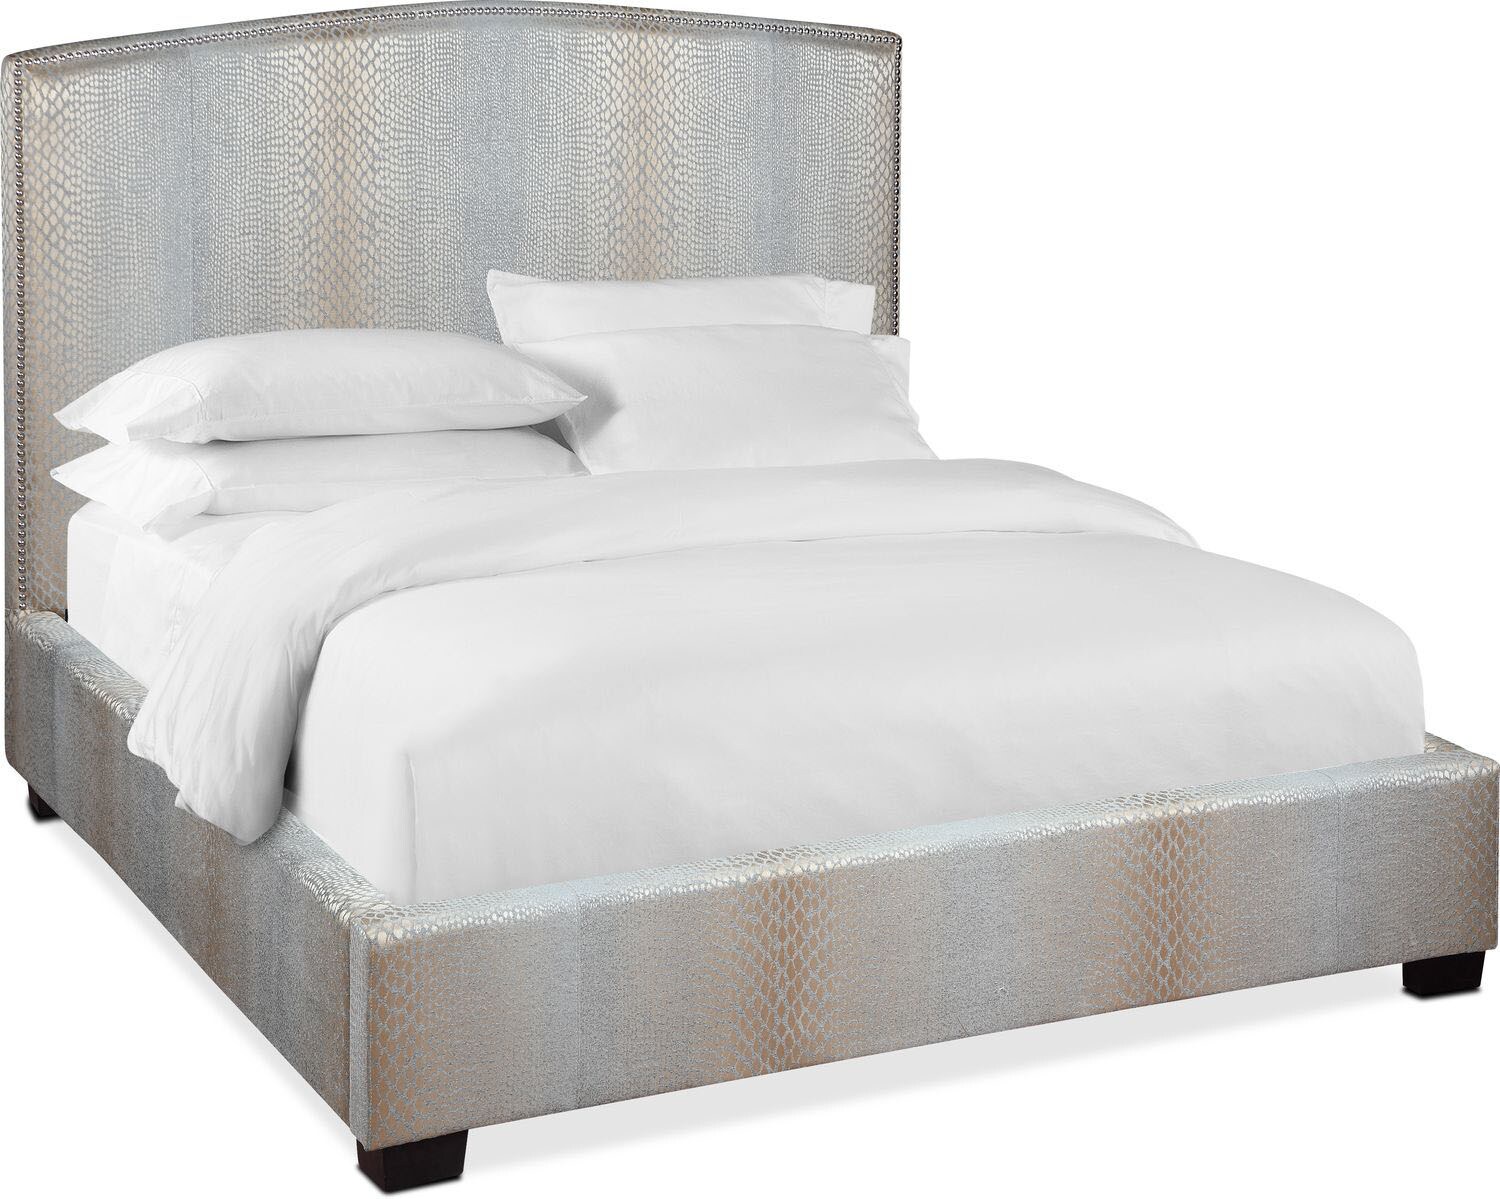 Grace King Upholstered Bed Spa Value City Furniture And Mattresses 